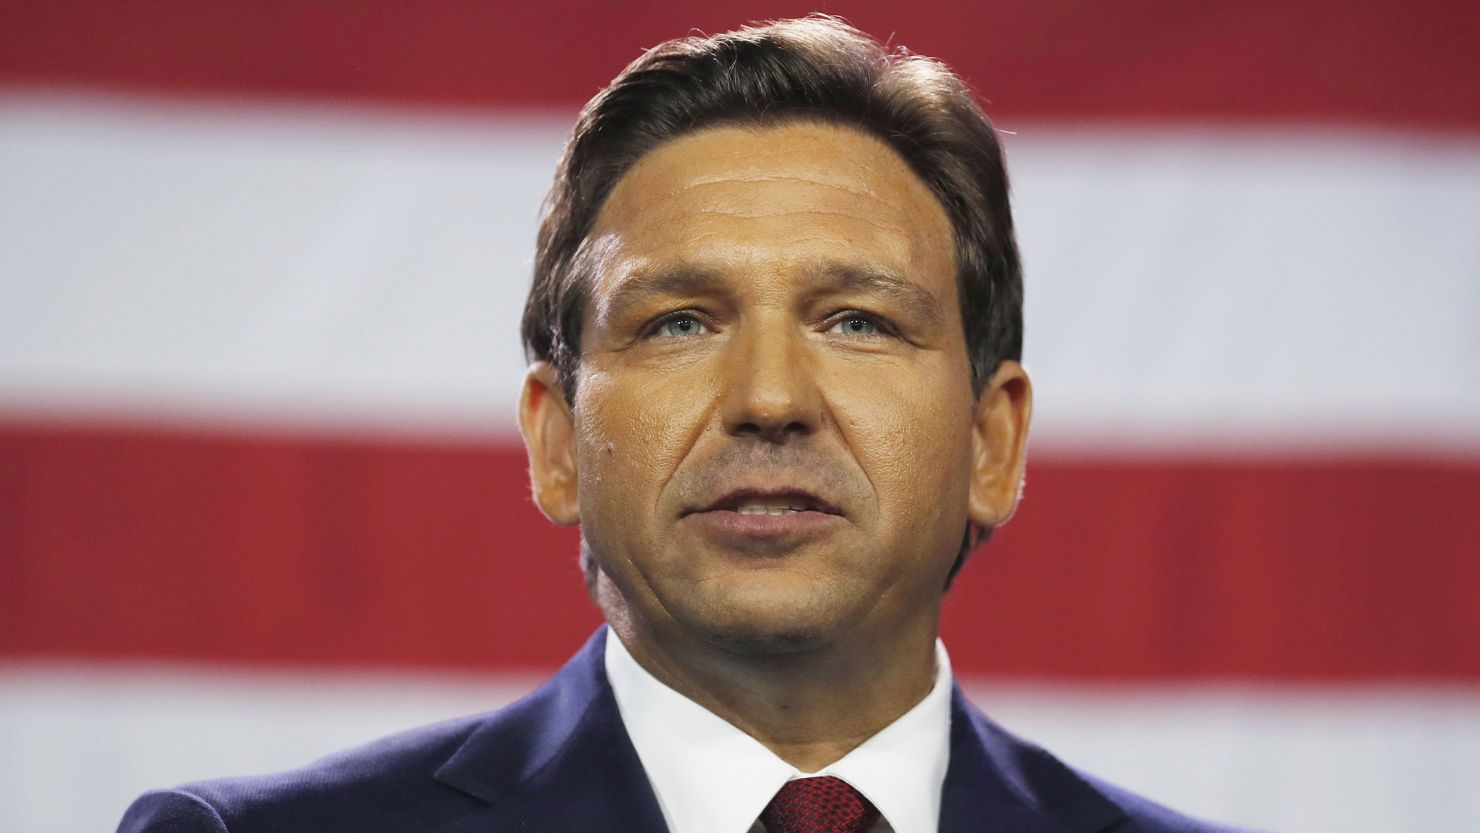 Florida Gov. Ron DeSantis gives a victory speech at his election night watch party in Tampa on November 8, 2022.